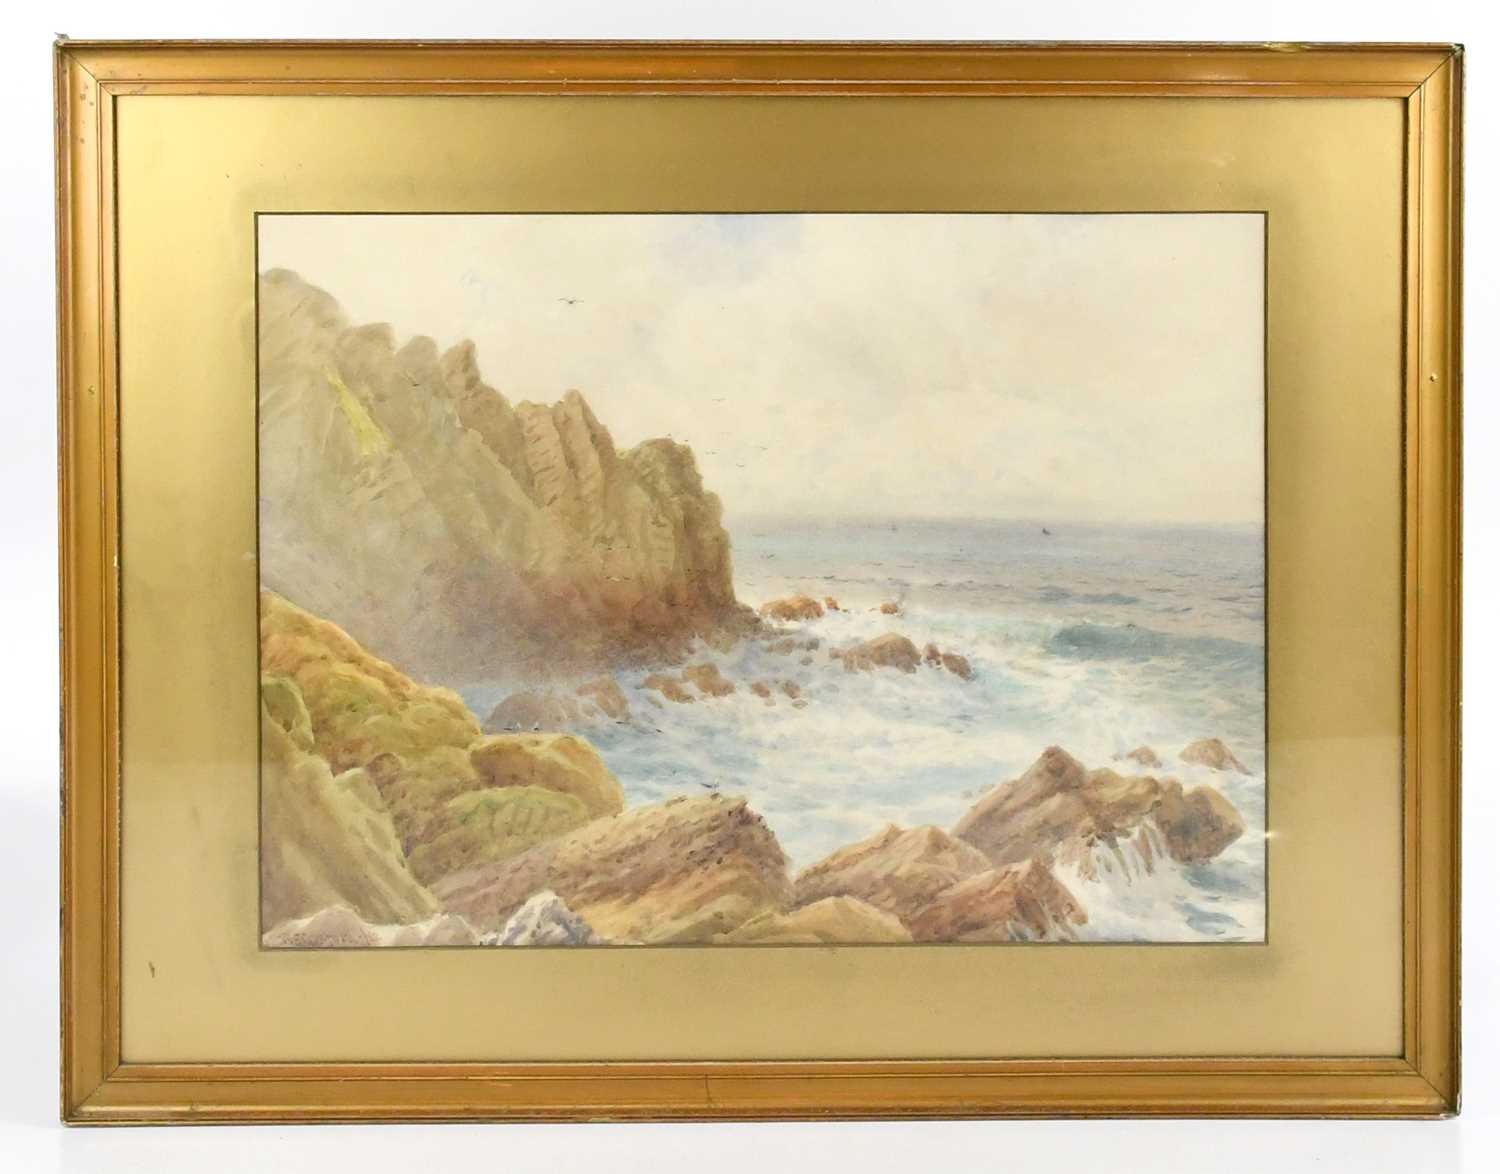 WE CROXFORD; watercolour, a coastal scene, signed lower left, 57 x 42cm, framed and glazed.